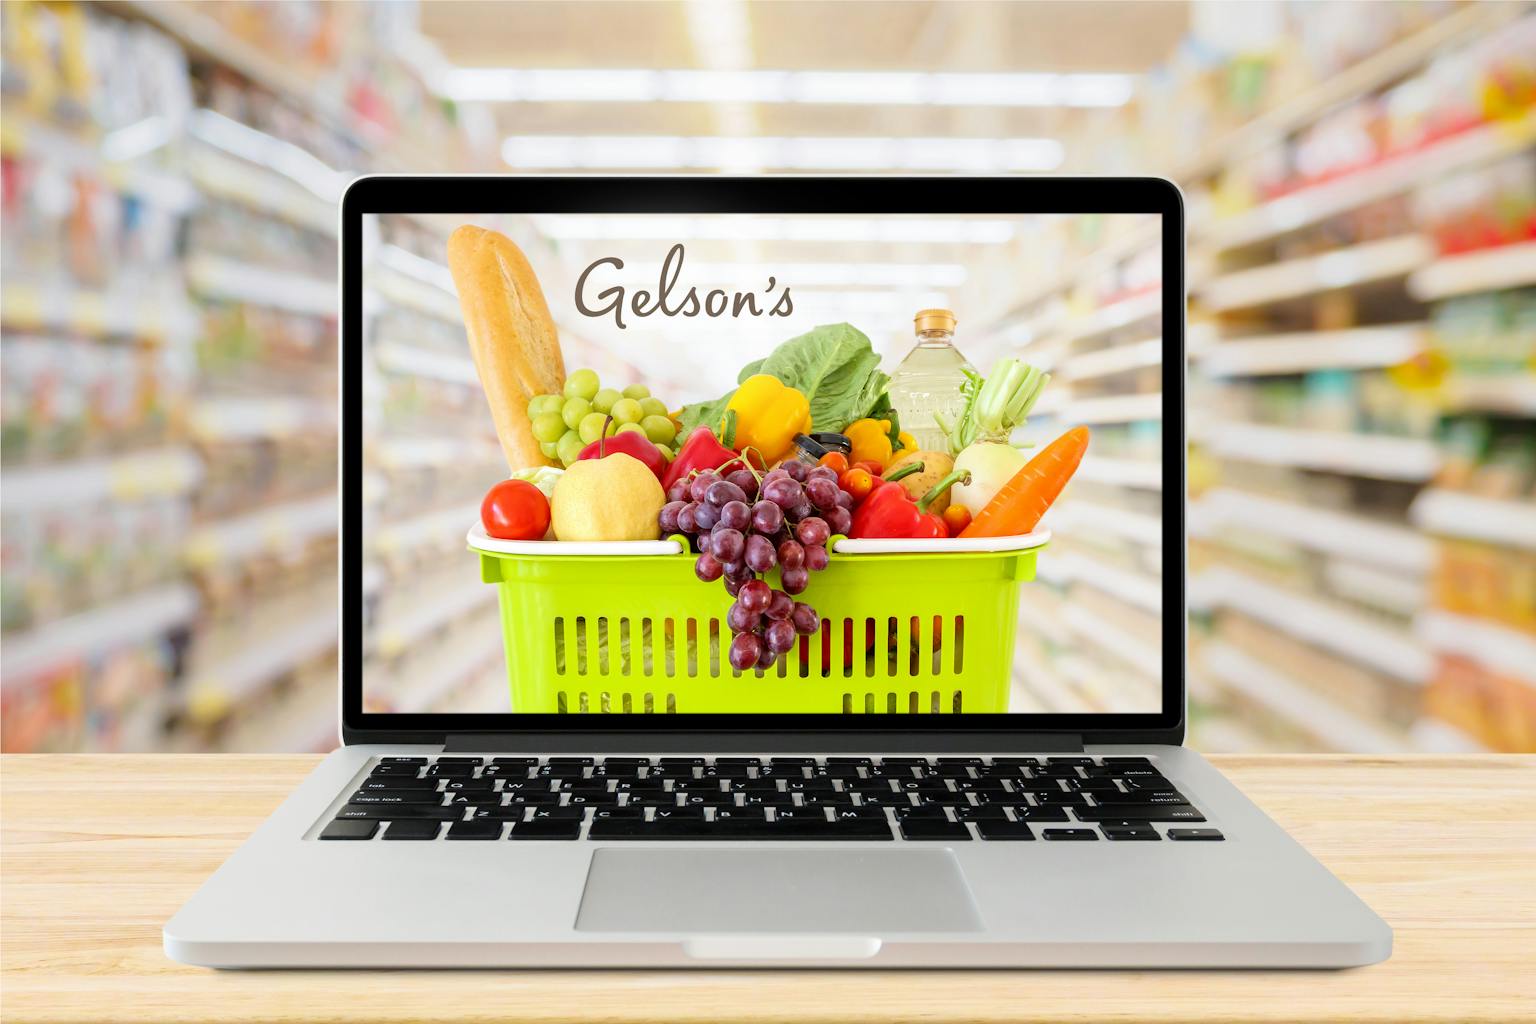 laptop with photo of cart with groceries and Gelson's logo background is blurred grocery store aisle